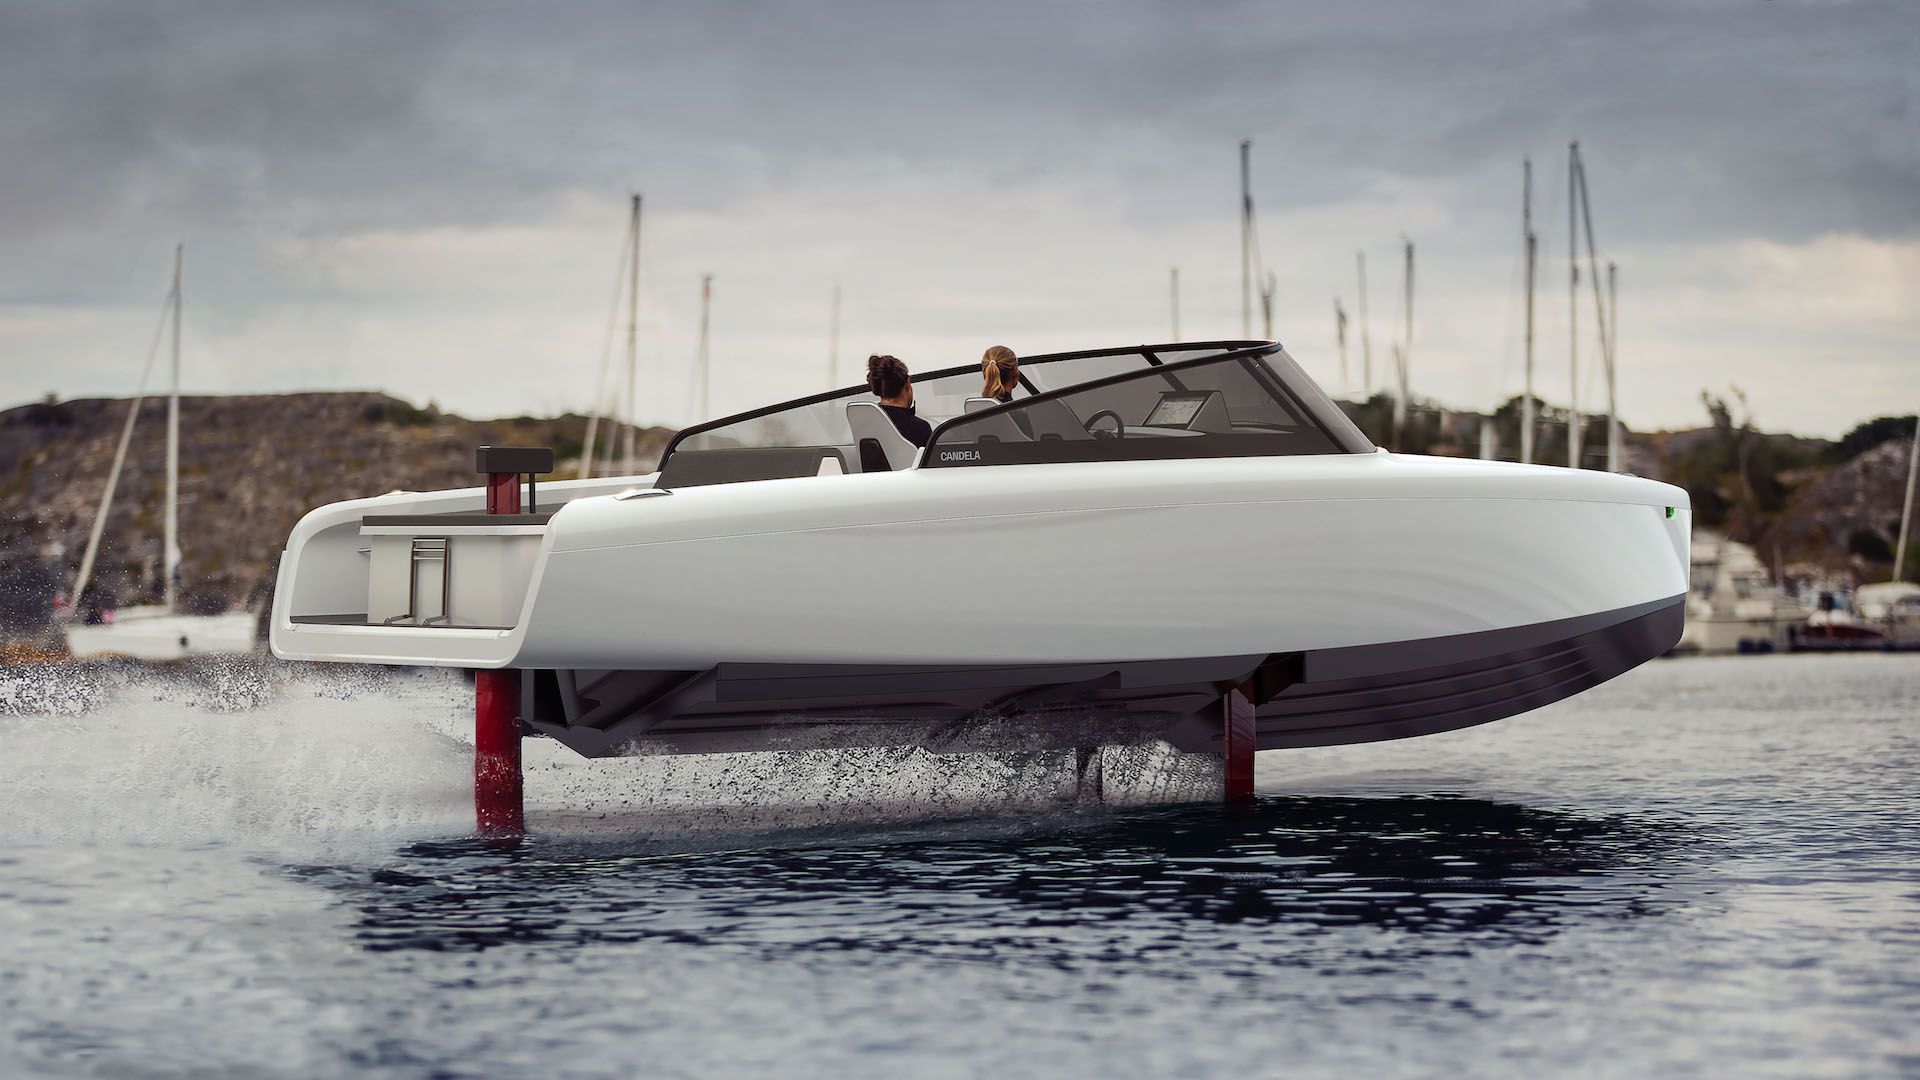 The Candela C-8 electric hydrofoiling boat.